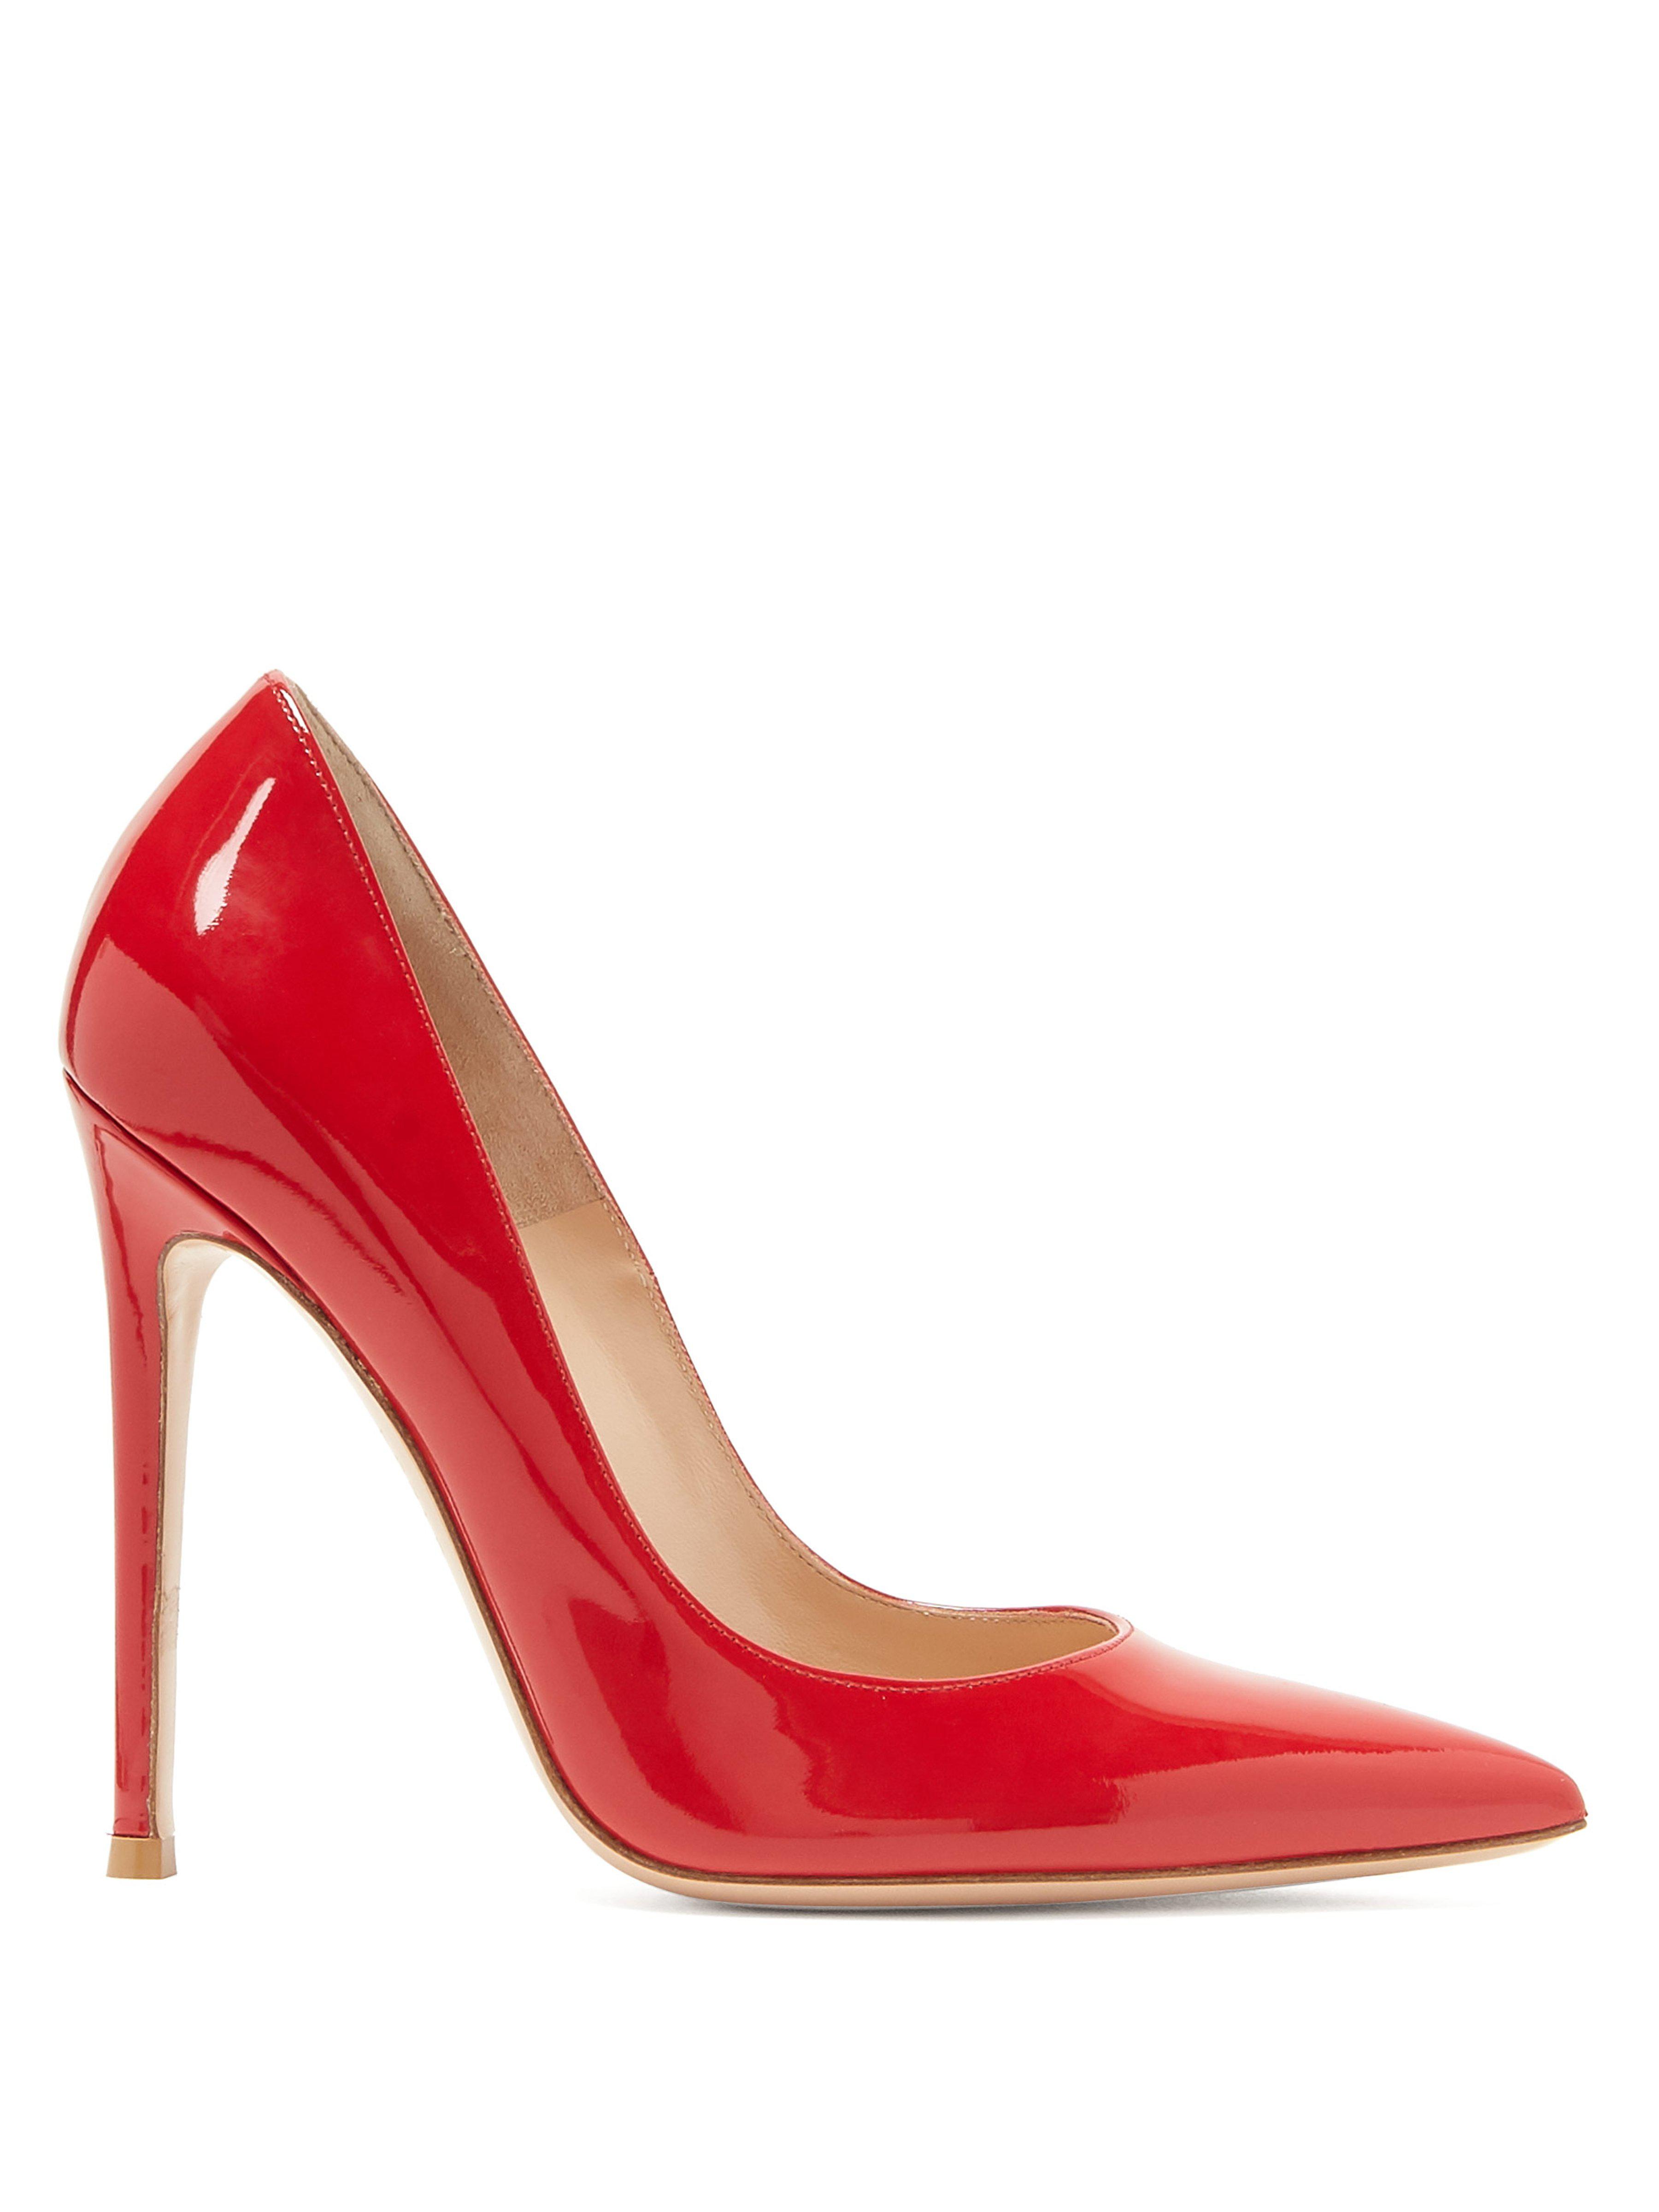 Gianvito Rossi Gianvito 105 Patent Leather Pumps in Red - Lyst